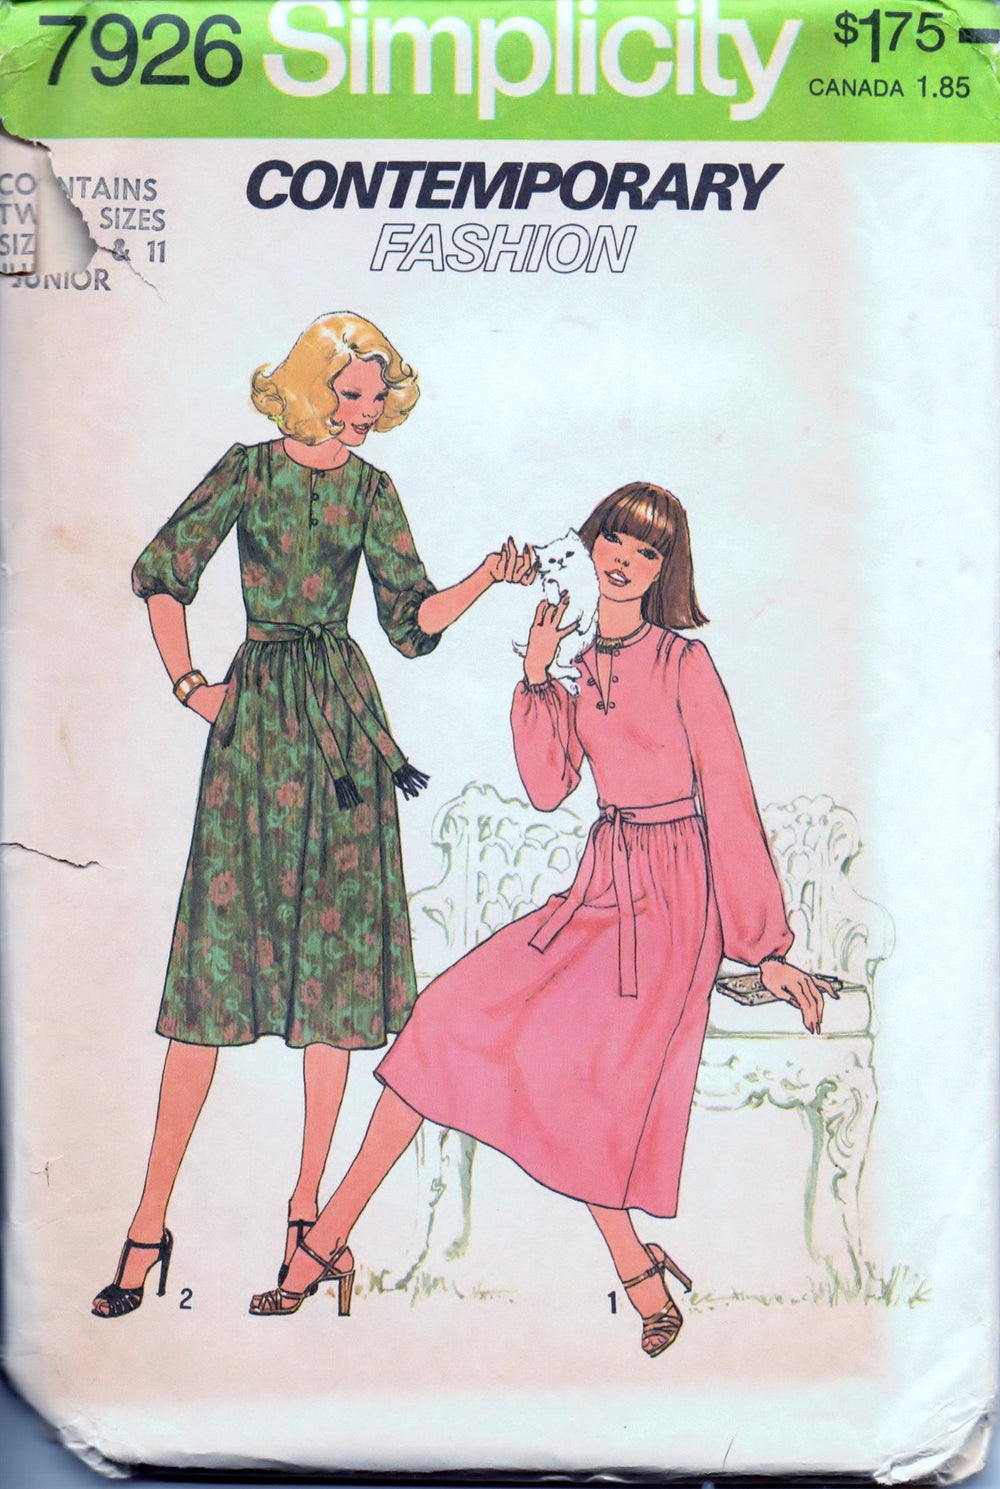 Simplicity 7926 Ladies Junior One-Piece Dress Vintage 1970's Sewing Pattern Contemporary Fashion - VintageStitching - Vintage Sewing Patterns